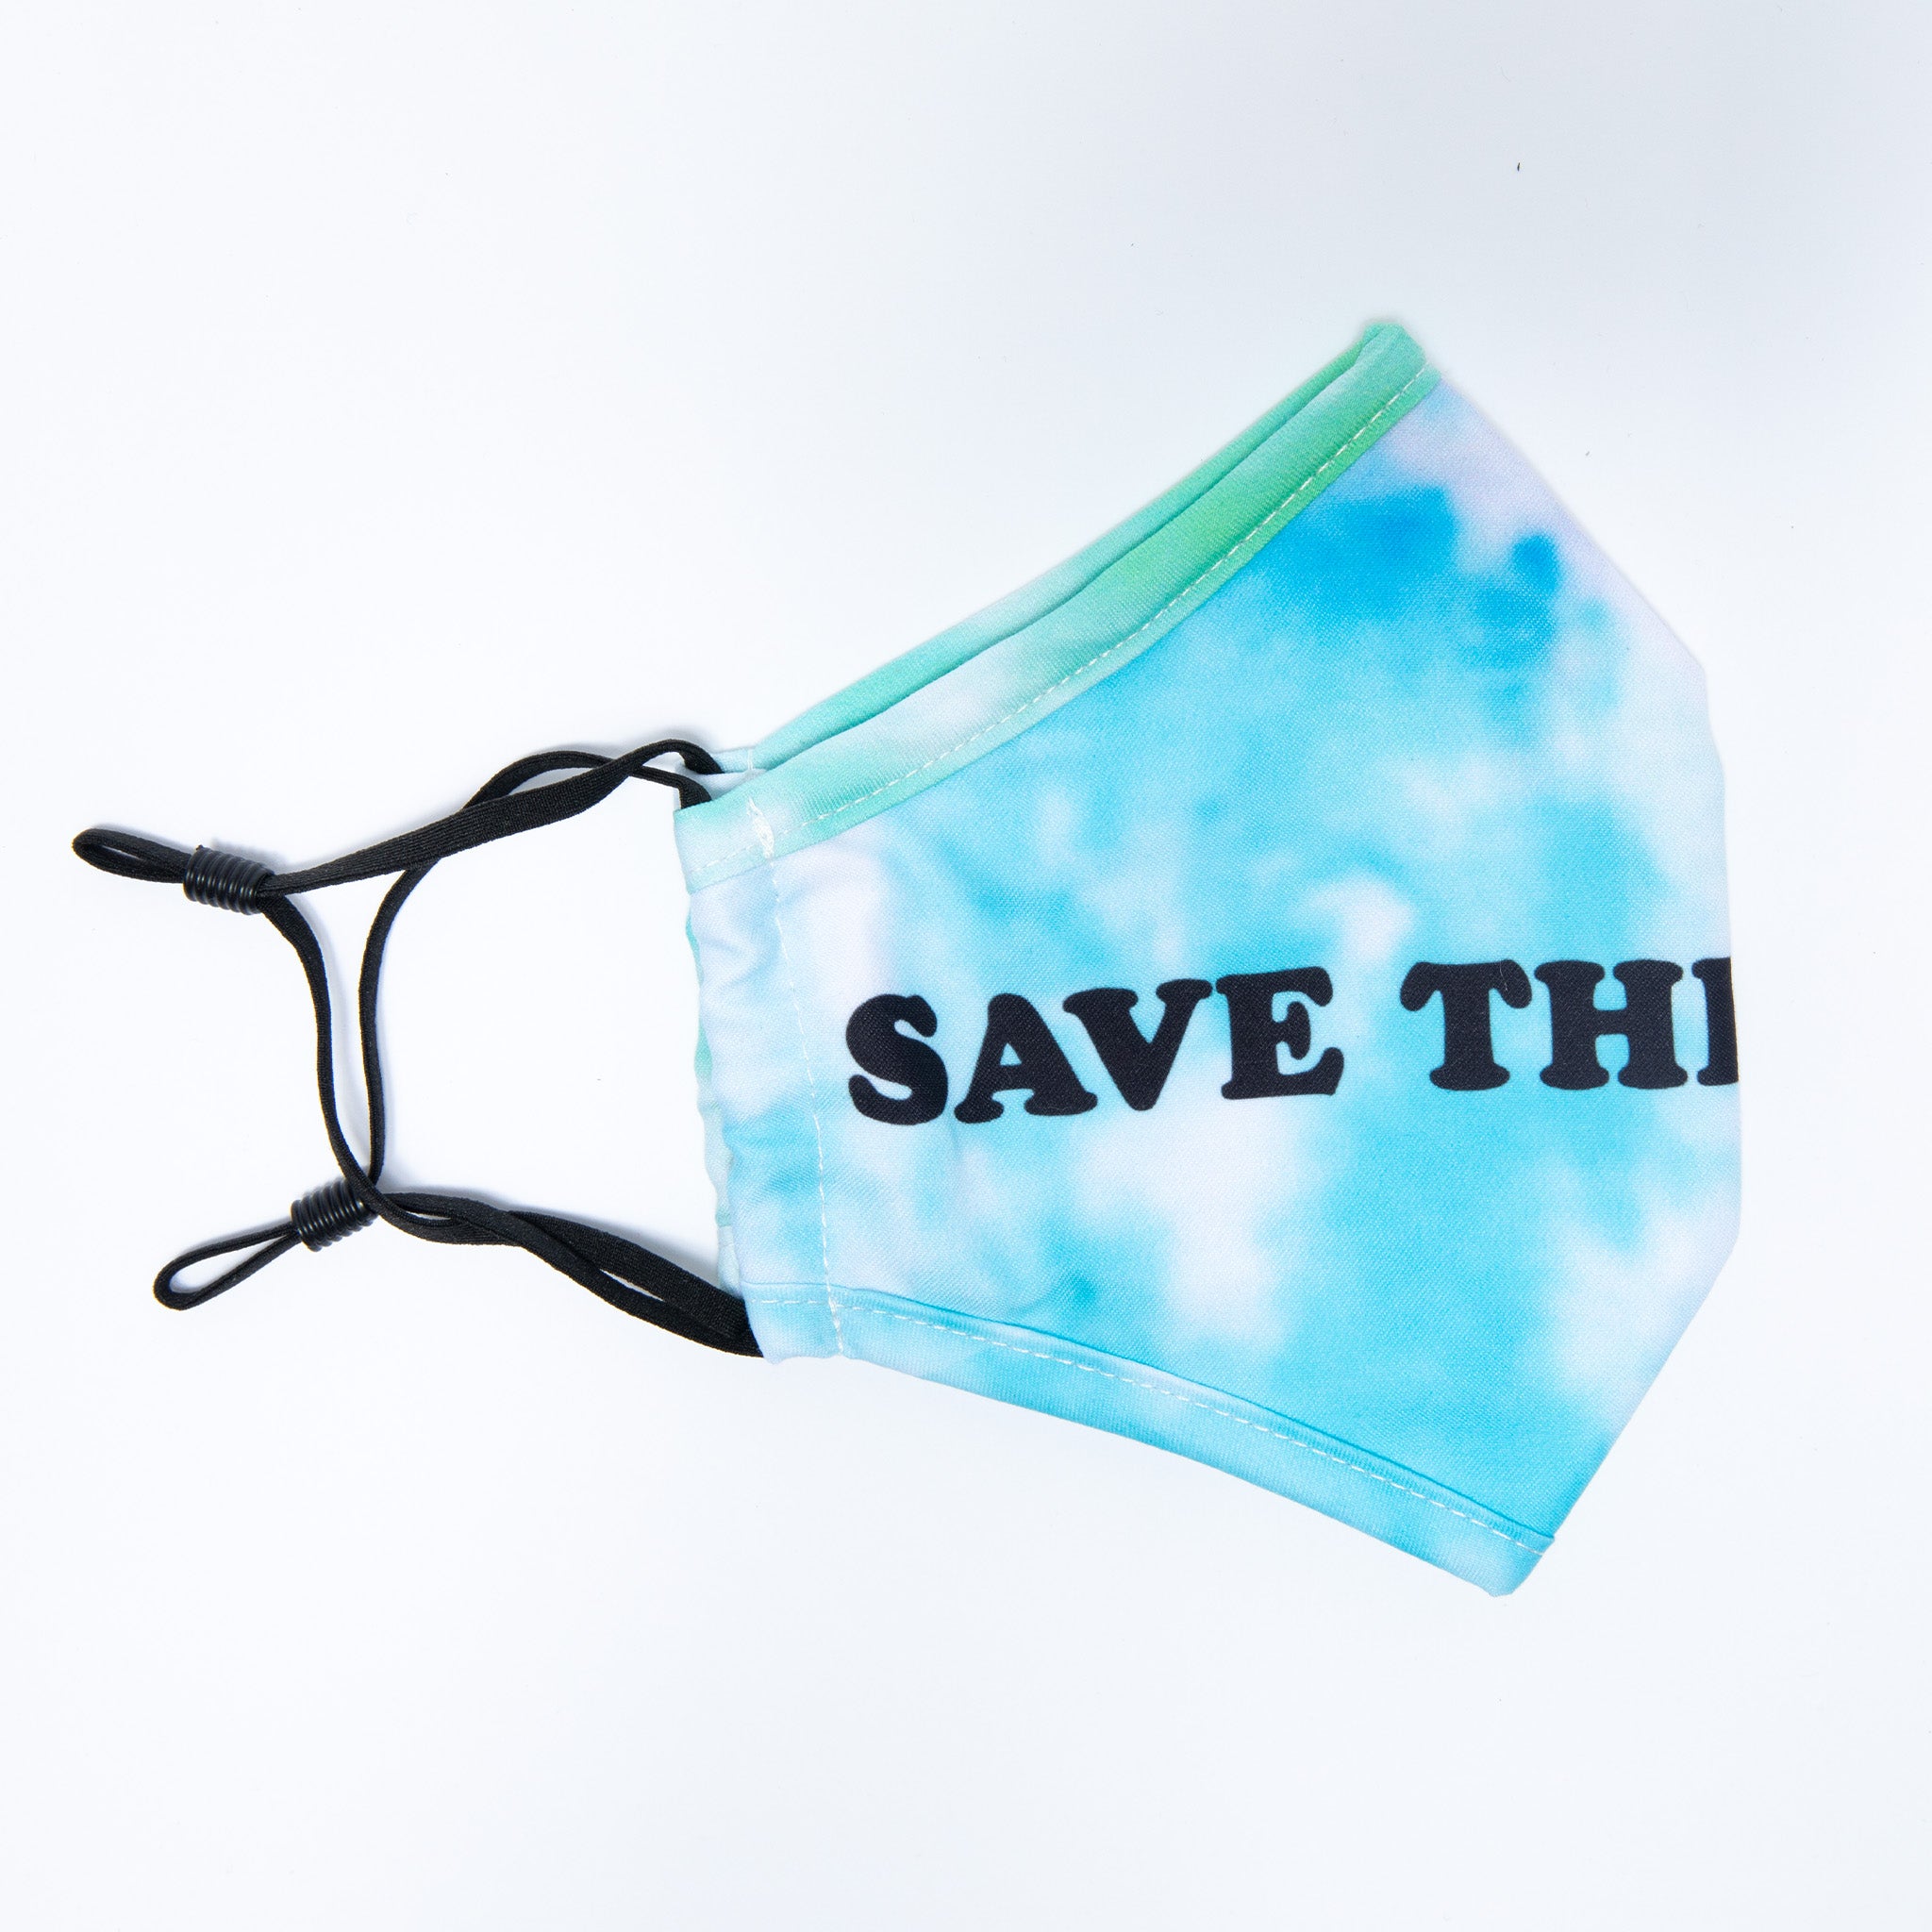 Save The World Face Mask (Blue)